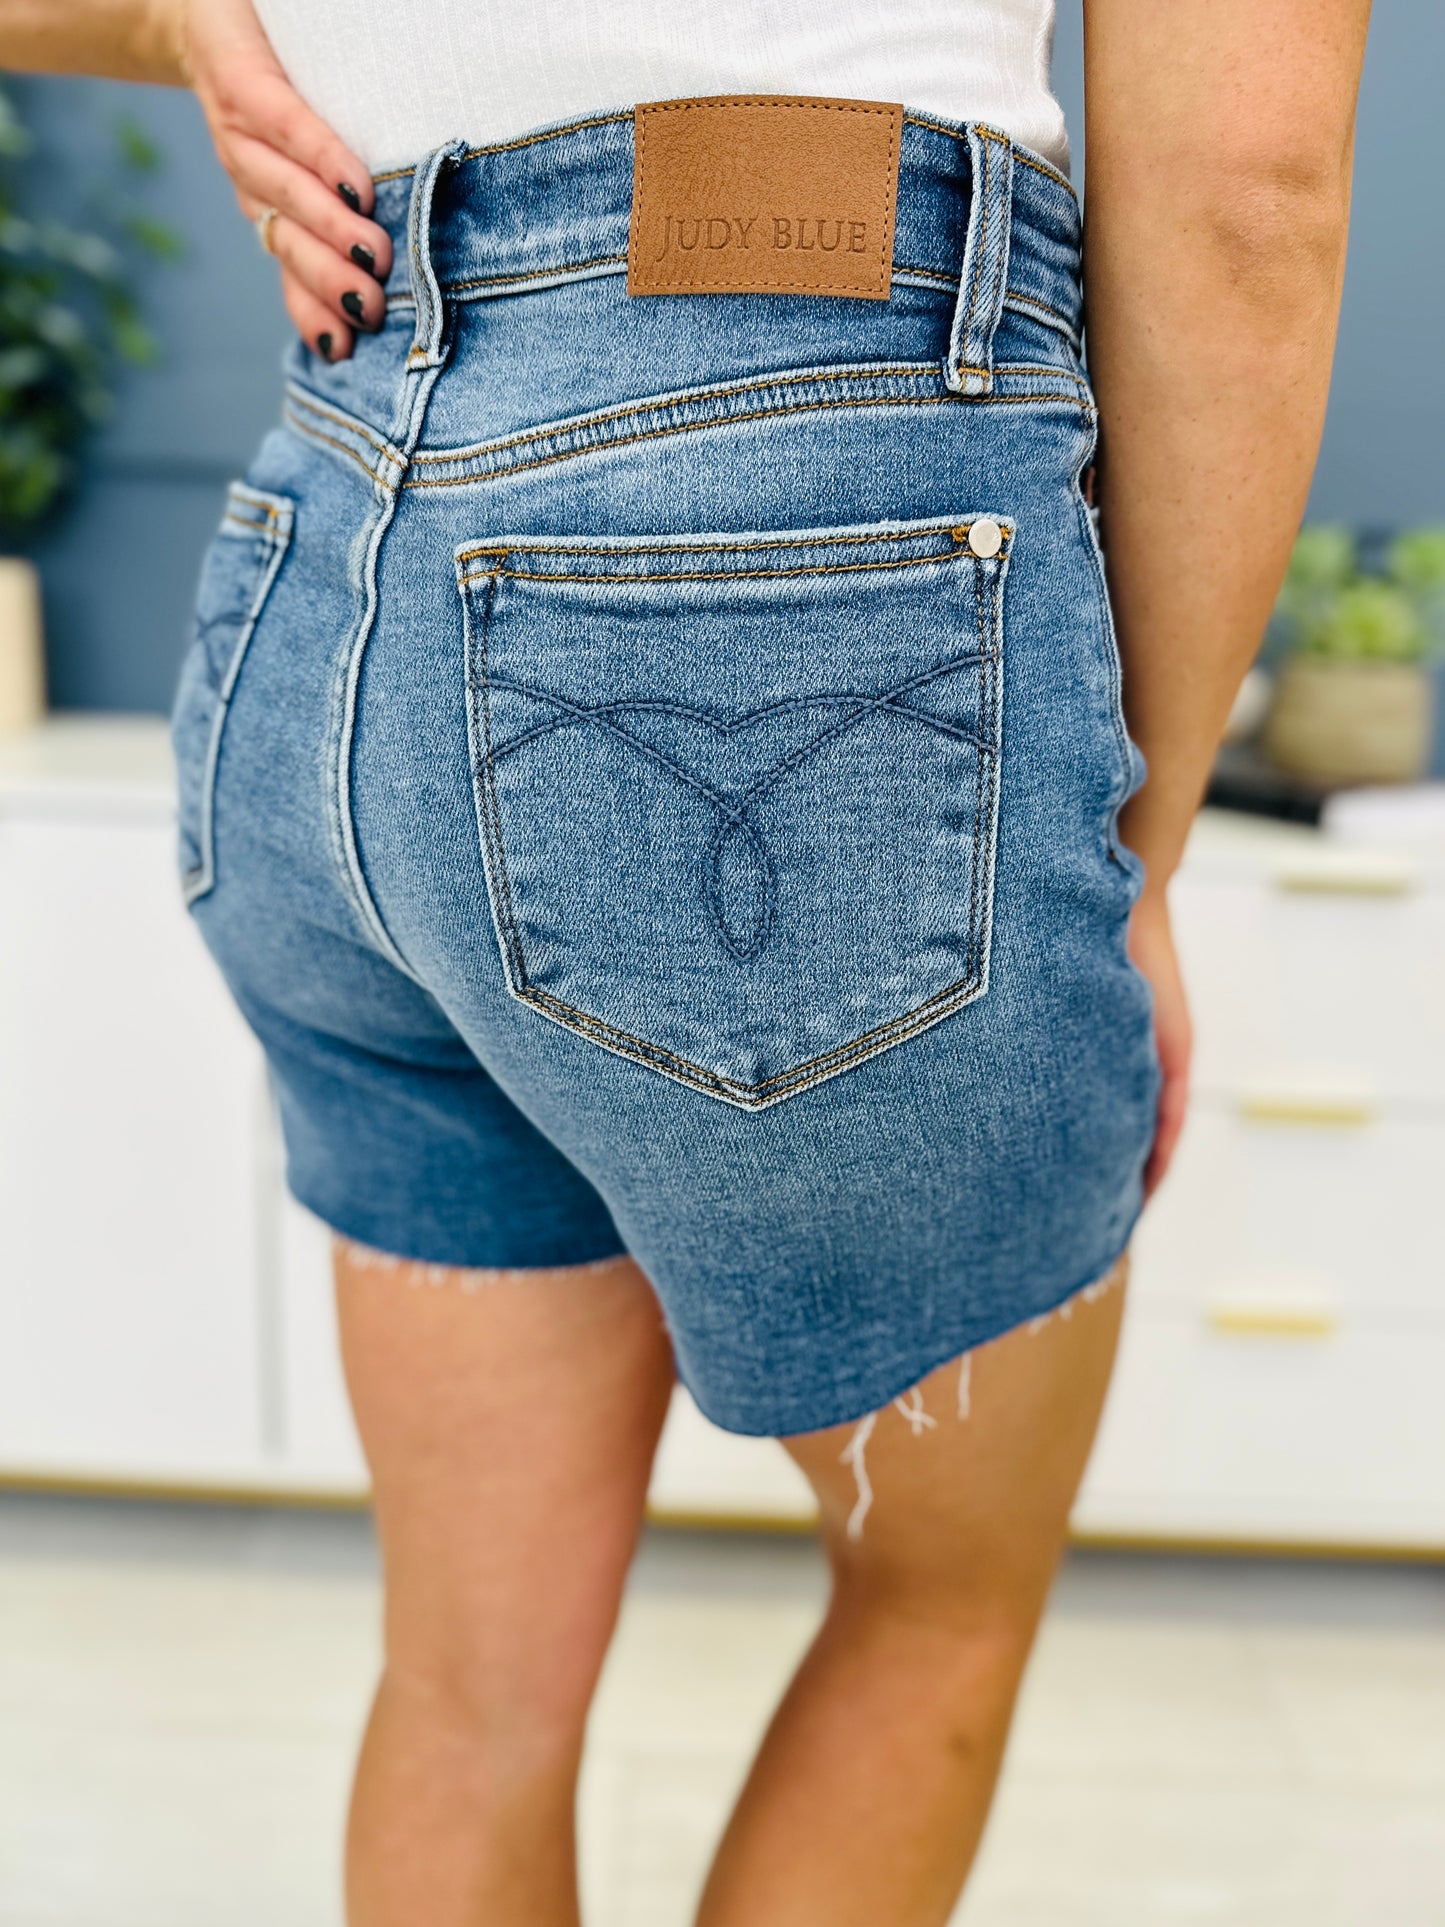 Judy Blue It Takes Two Relaxed Fit Shorts-- Two Washes in Reg/Curvy